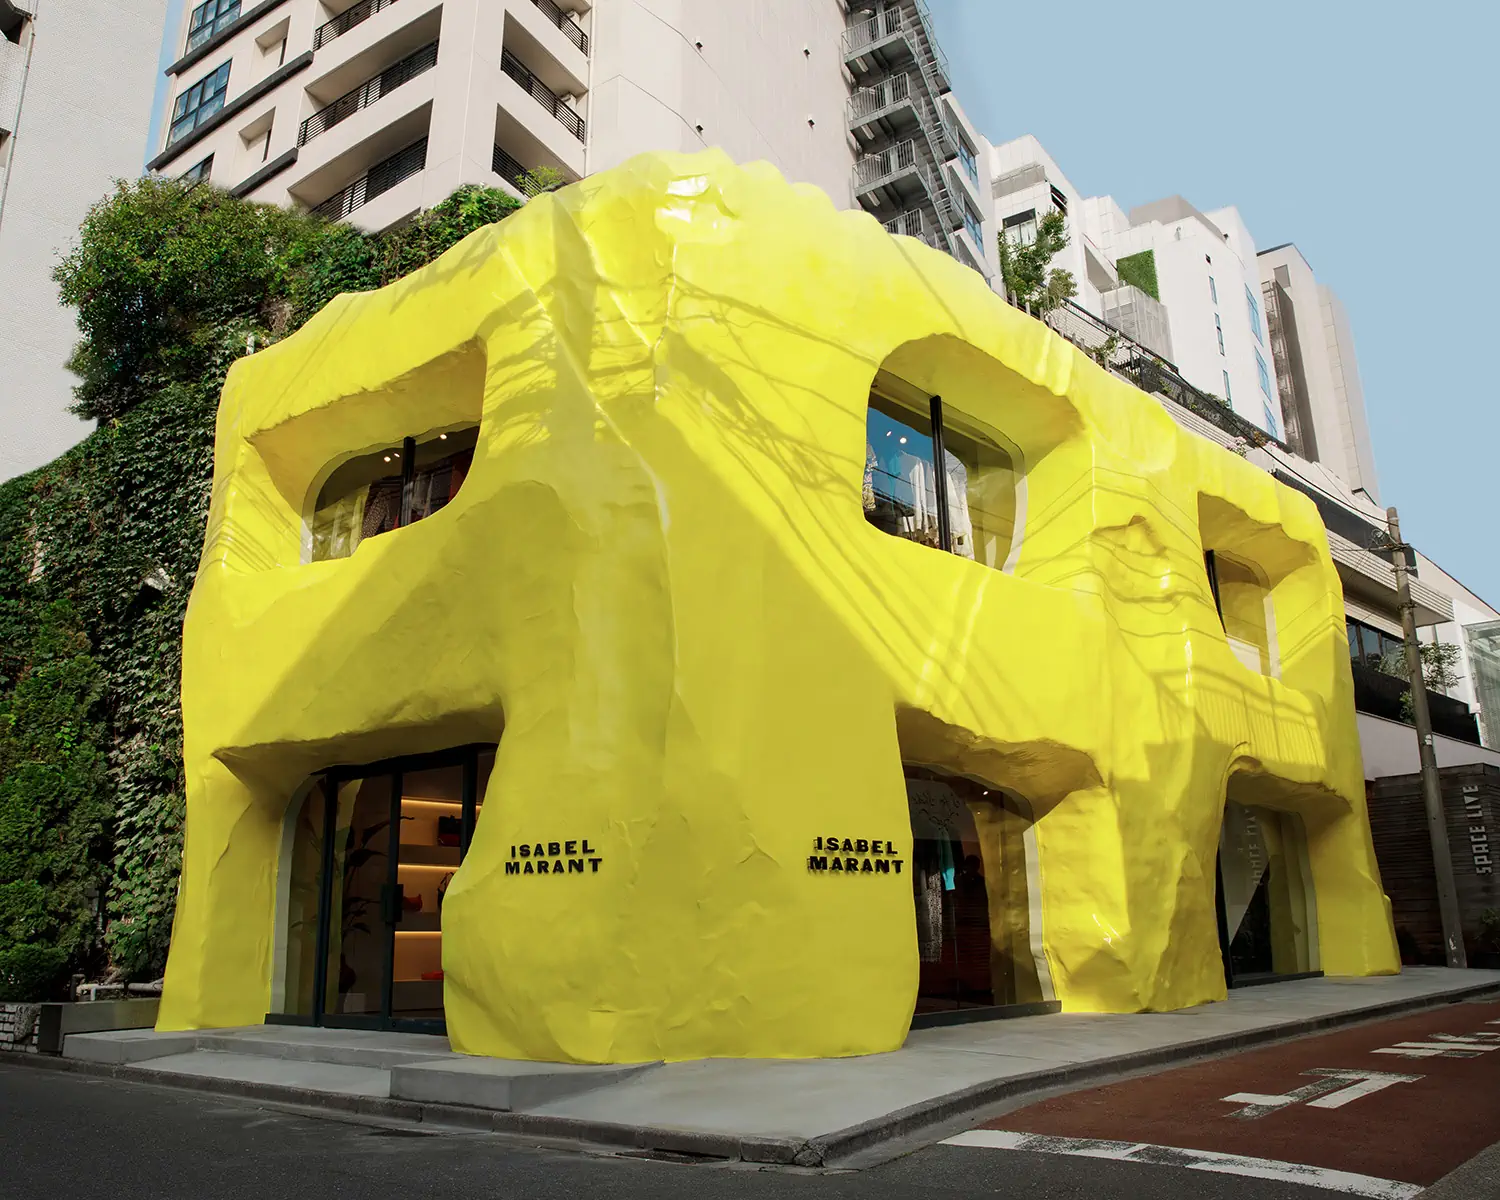 Isabel Marant unveils new boutiques in Tokyo and East Hampton